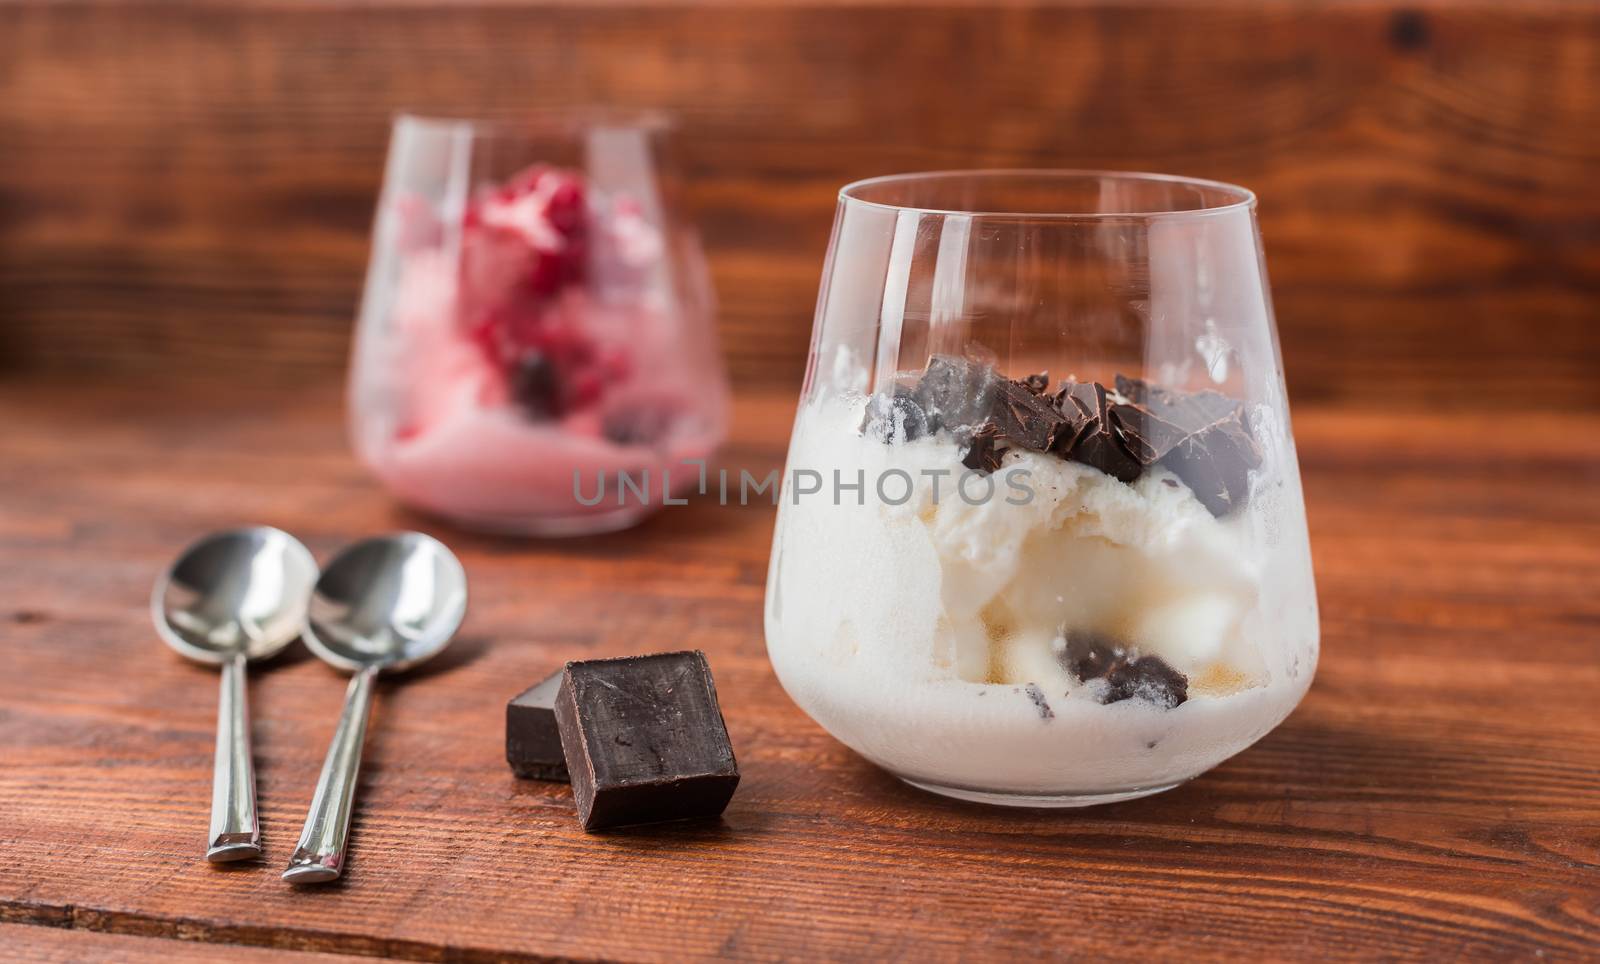 Sweet desert with ice cream, chocolate and berries in glass by Seva_blsv